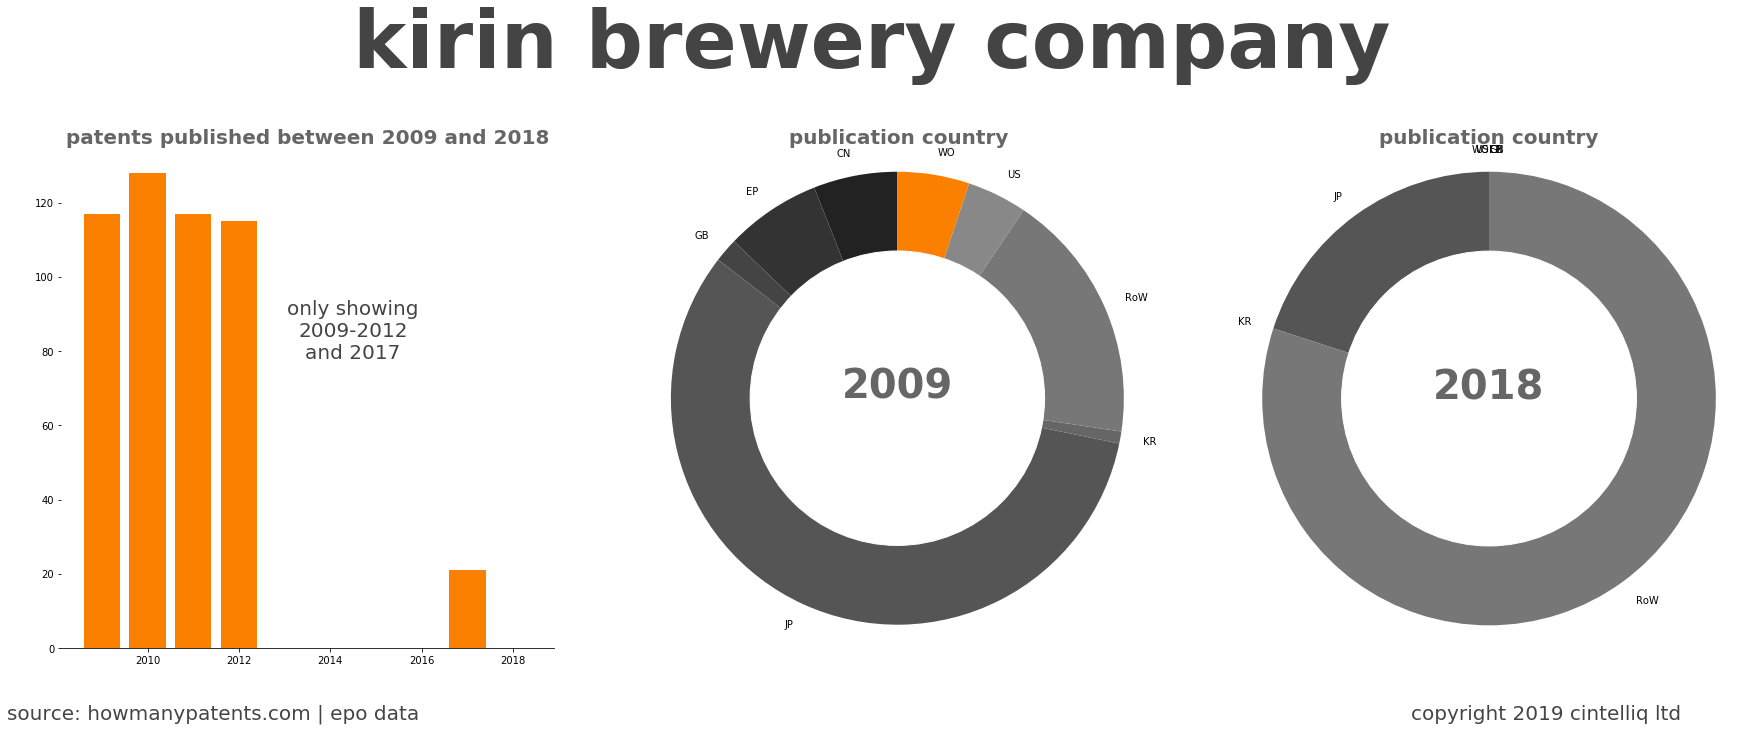 summary of patents for Kirin Brewery Company